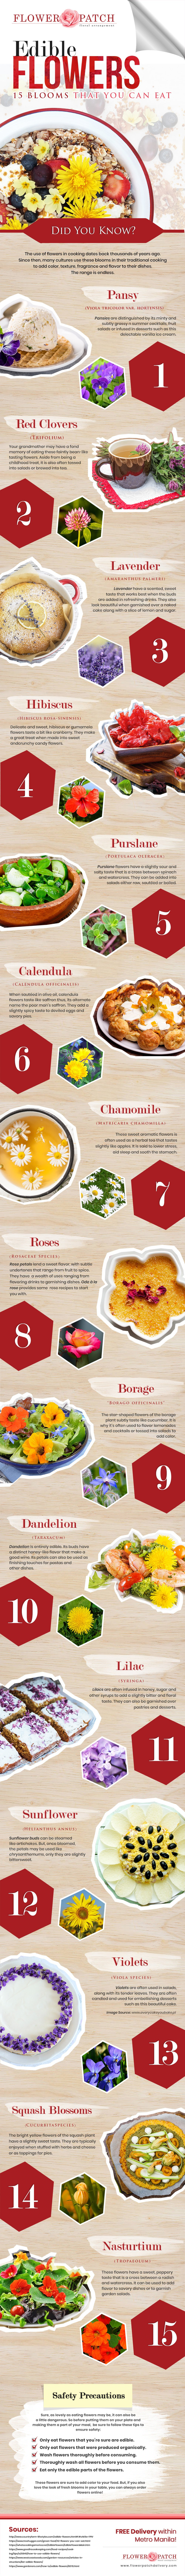 Edible Flowers: 15 Blooms that You Can Eat #Infographic